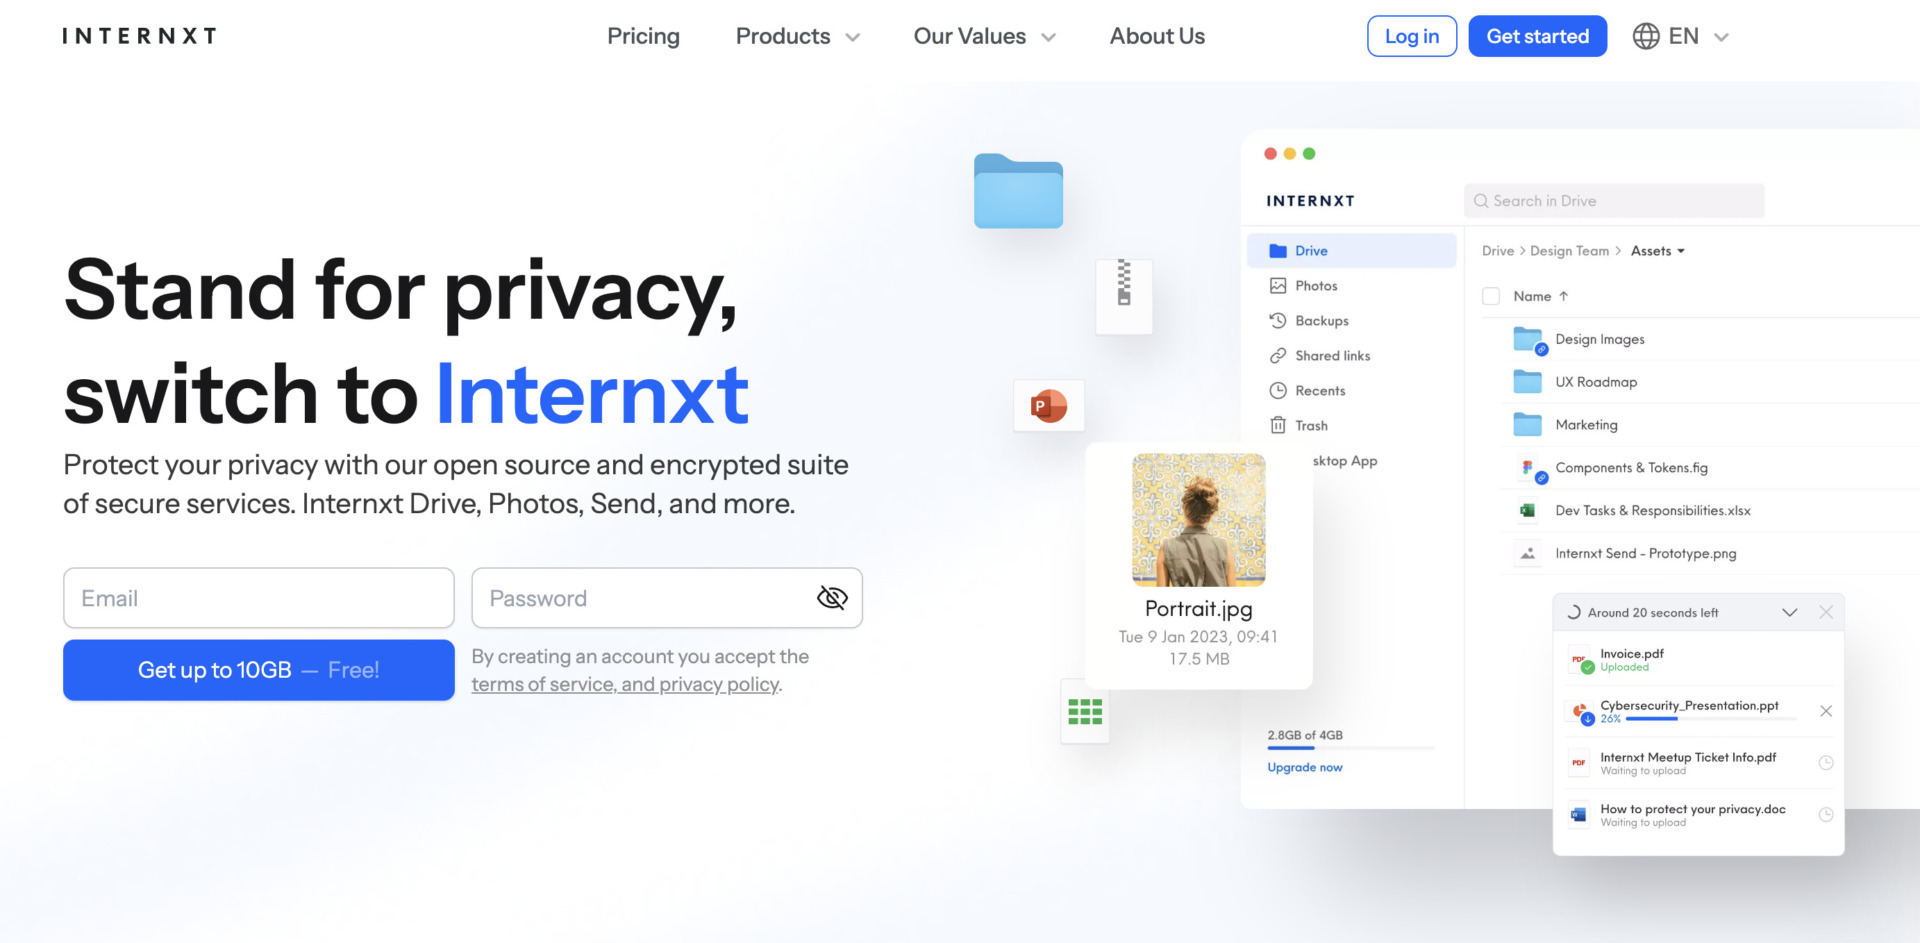 Top page of Internxt